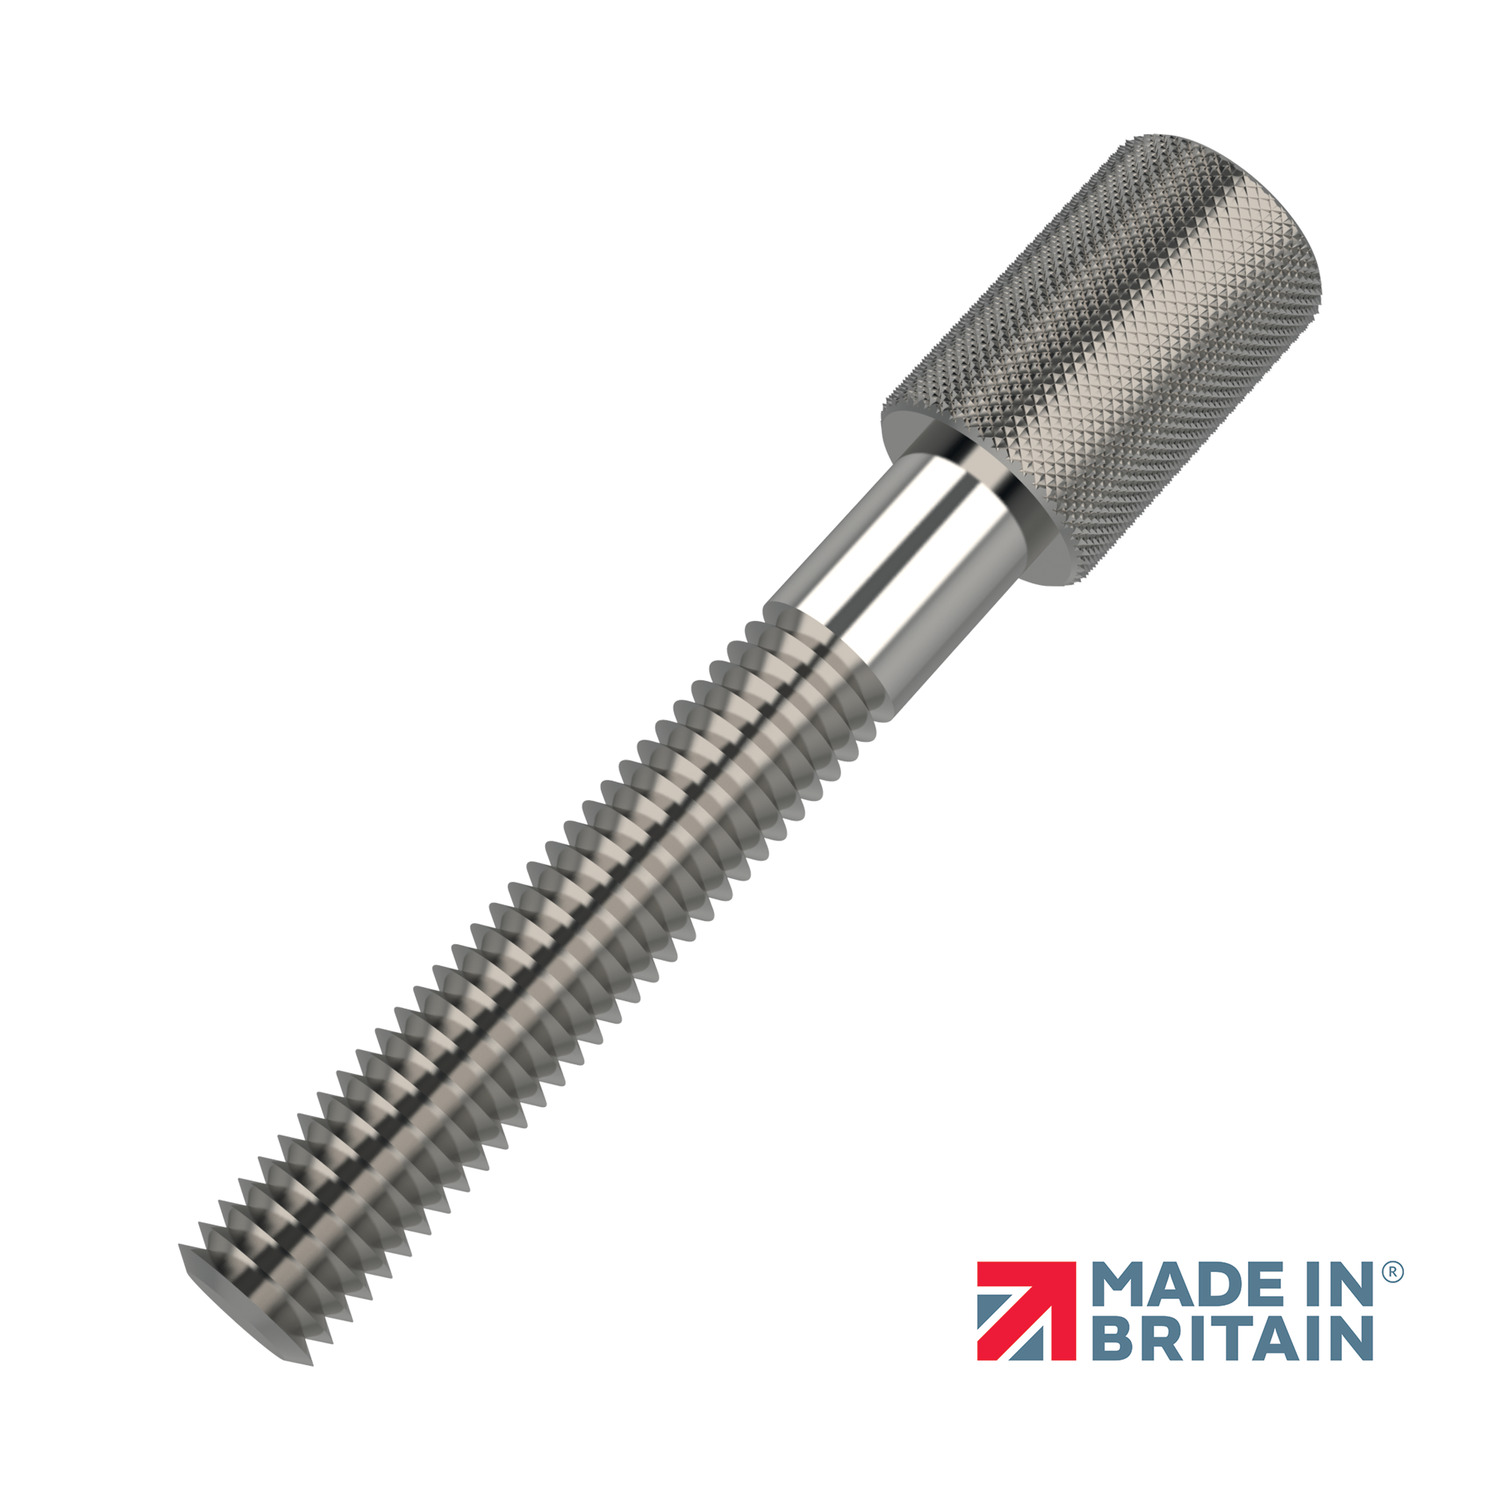 P0435.03-06-12-A2 Thin head thumb screw - M 3x12 Stainless steel 303